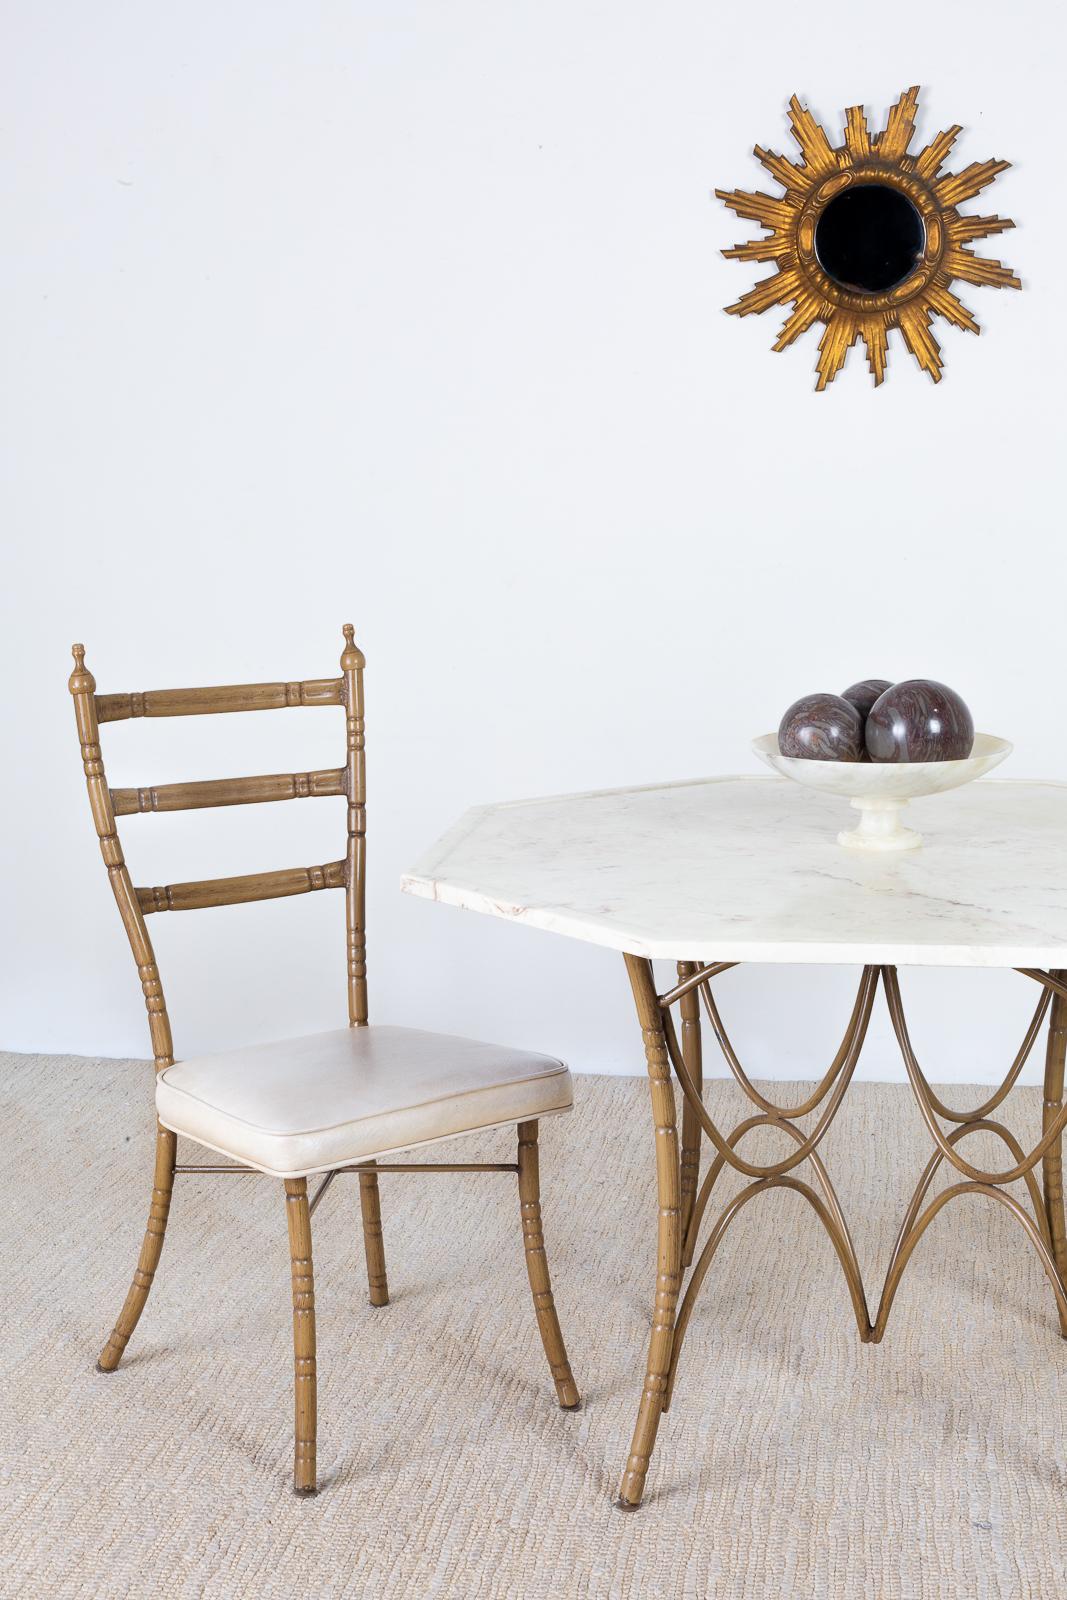 Whimsical set of four Italian Mid-Century Modern dining chairs featuring unique faux bamboo iron frames. Each chair has a ladder back design with splayed legs in the back. The chairs have graceful curves topped with a finial on each side. The iron